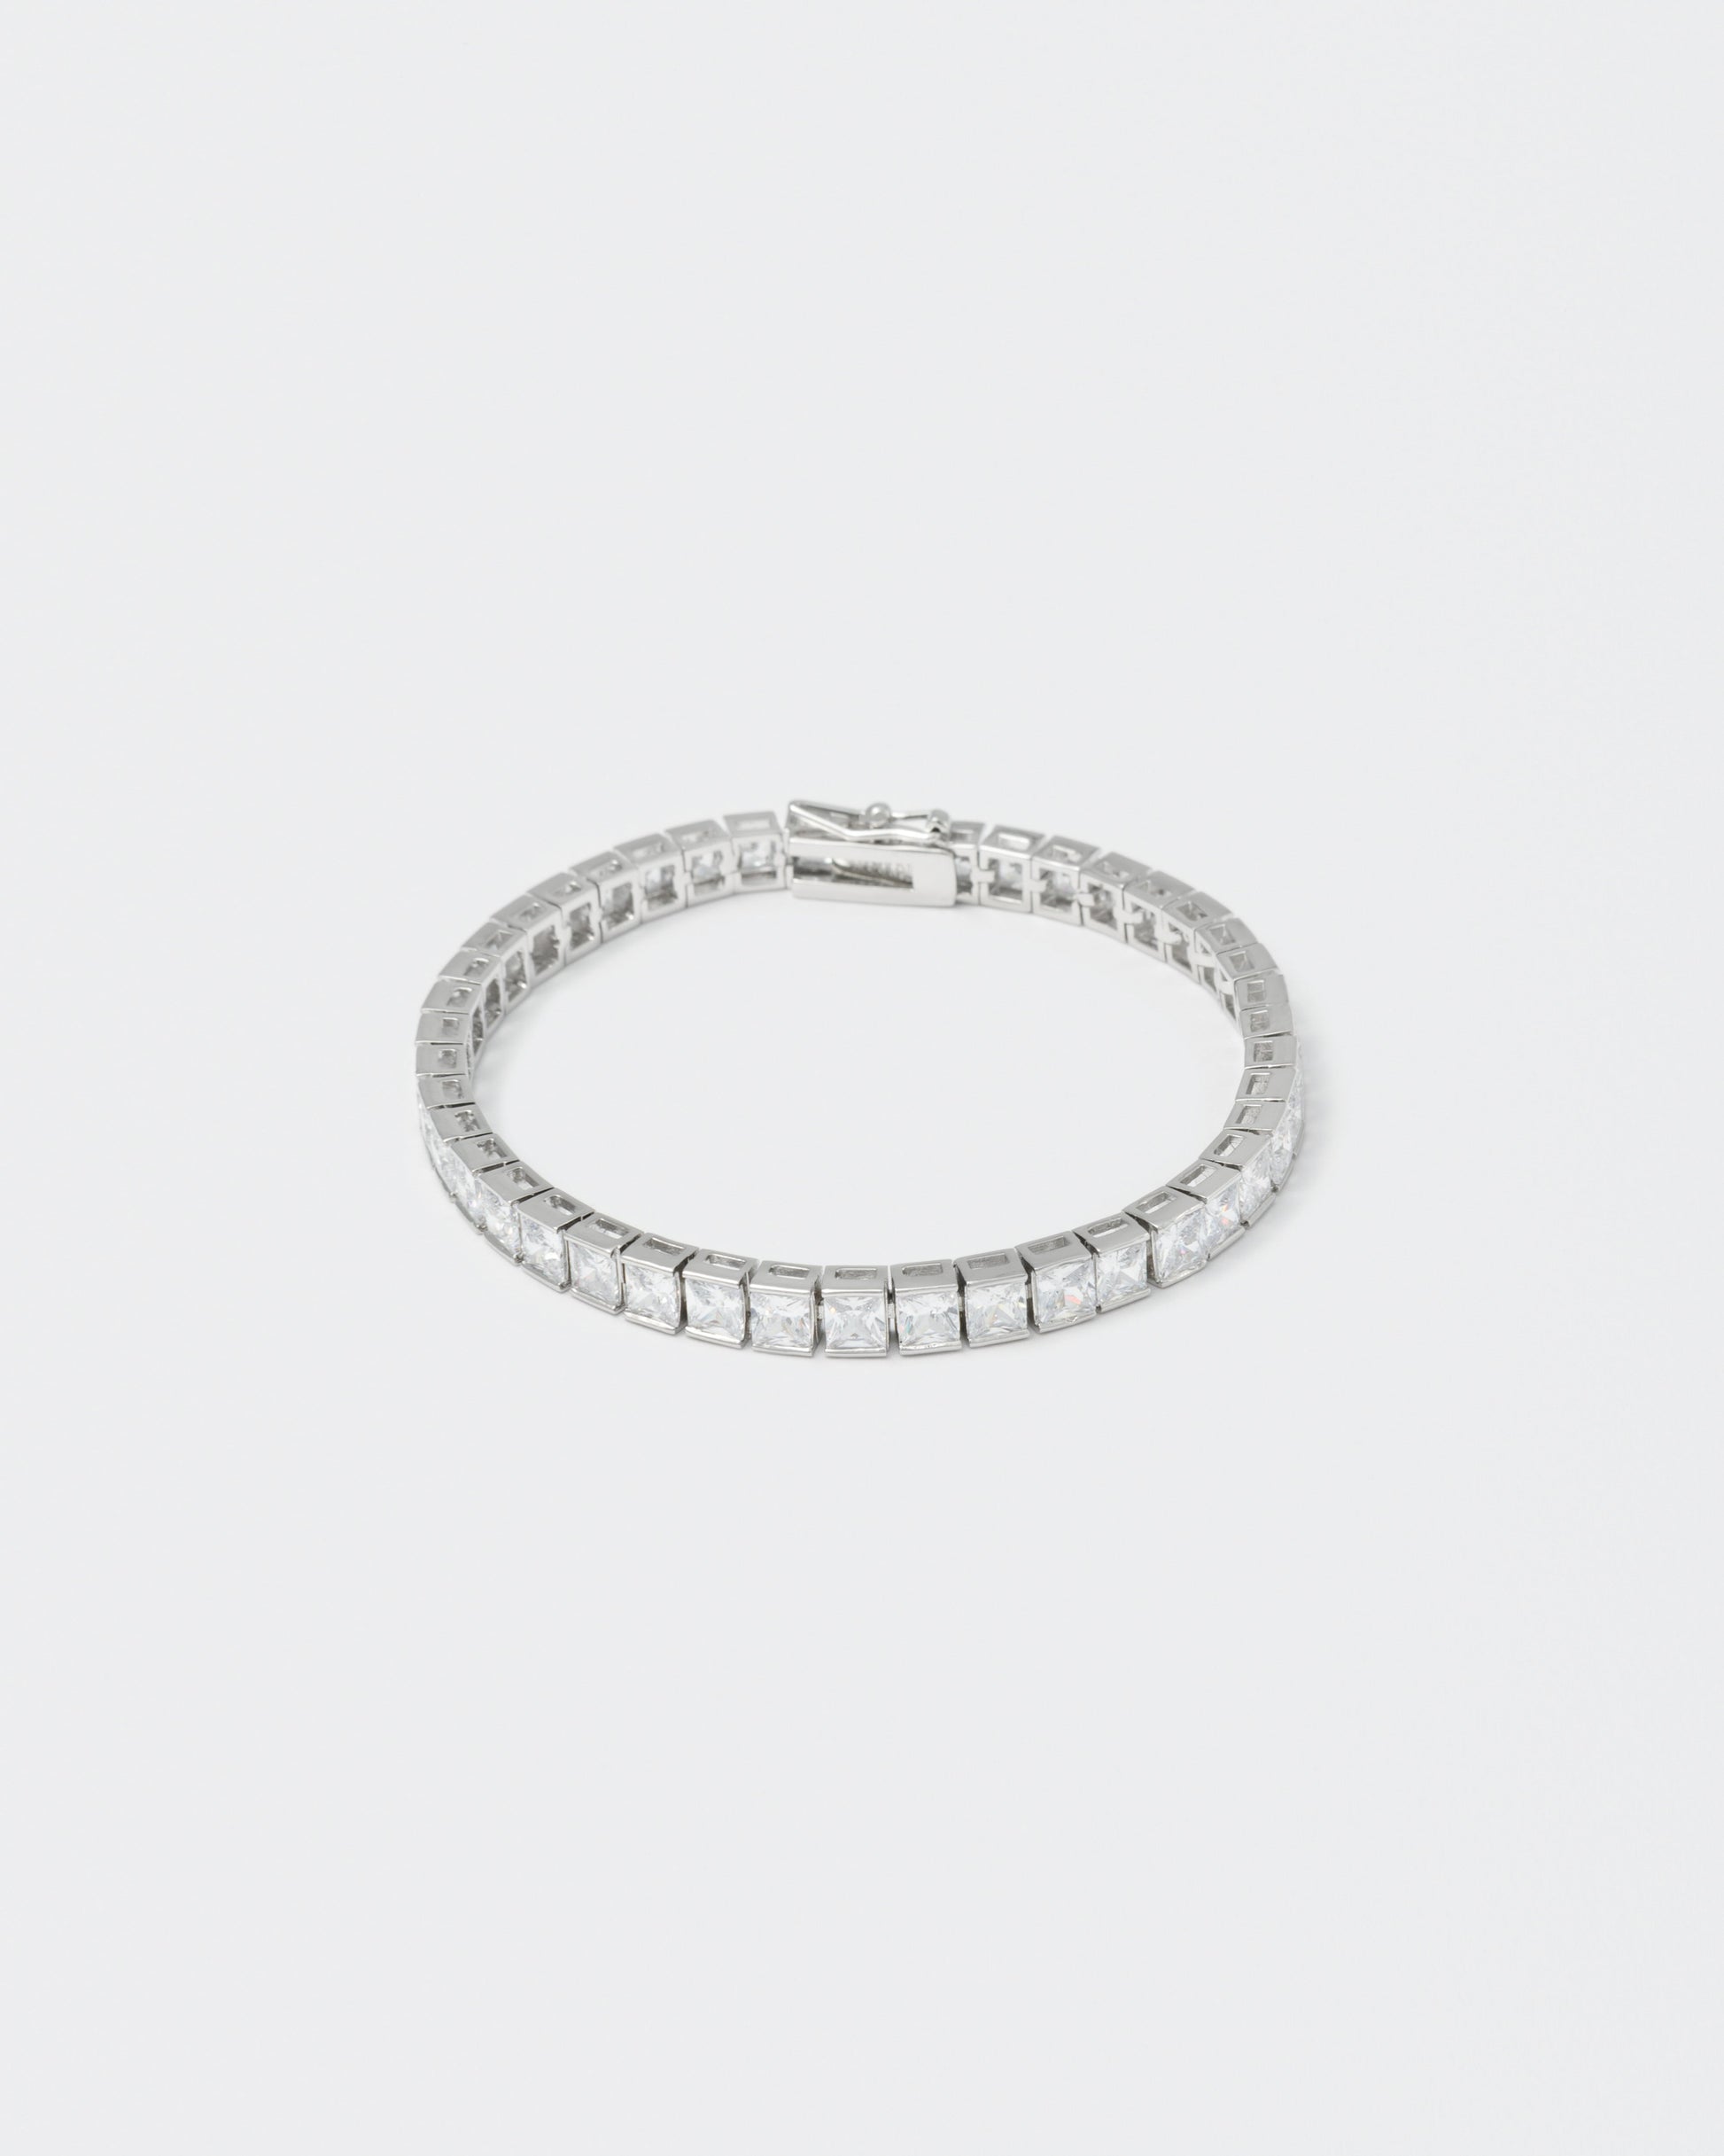 18k white gold coated tennis chain bracelet with white hand-set princess-cut stones